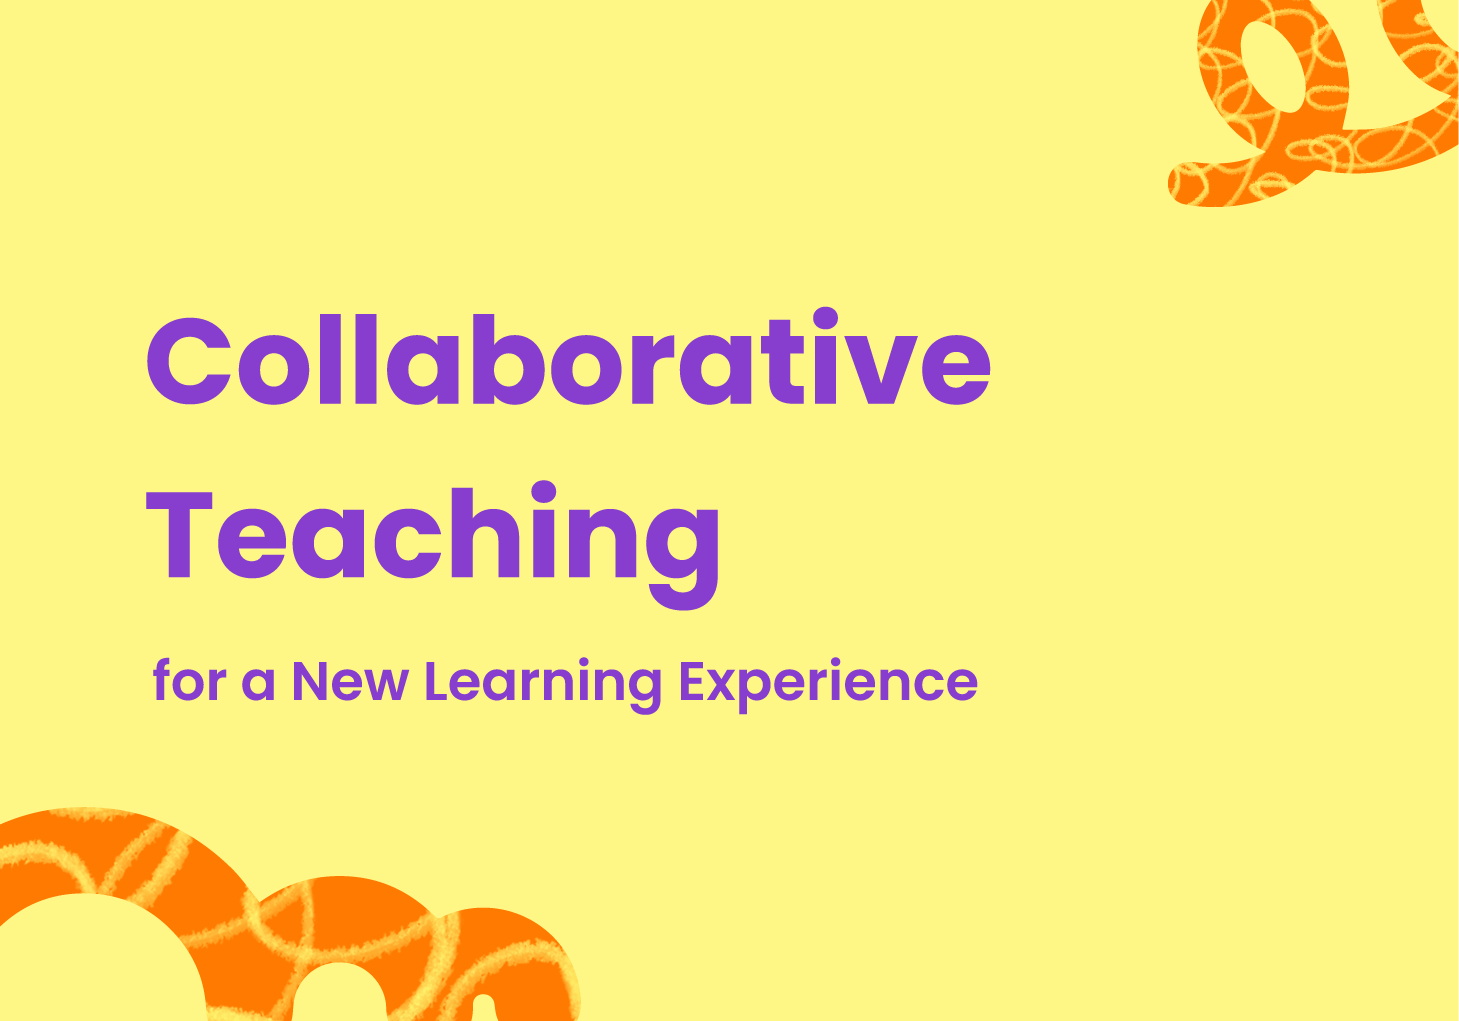 Collaborative Teaching for a New Learning Experience